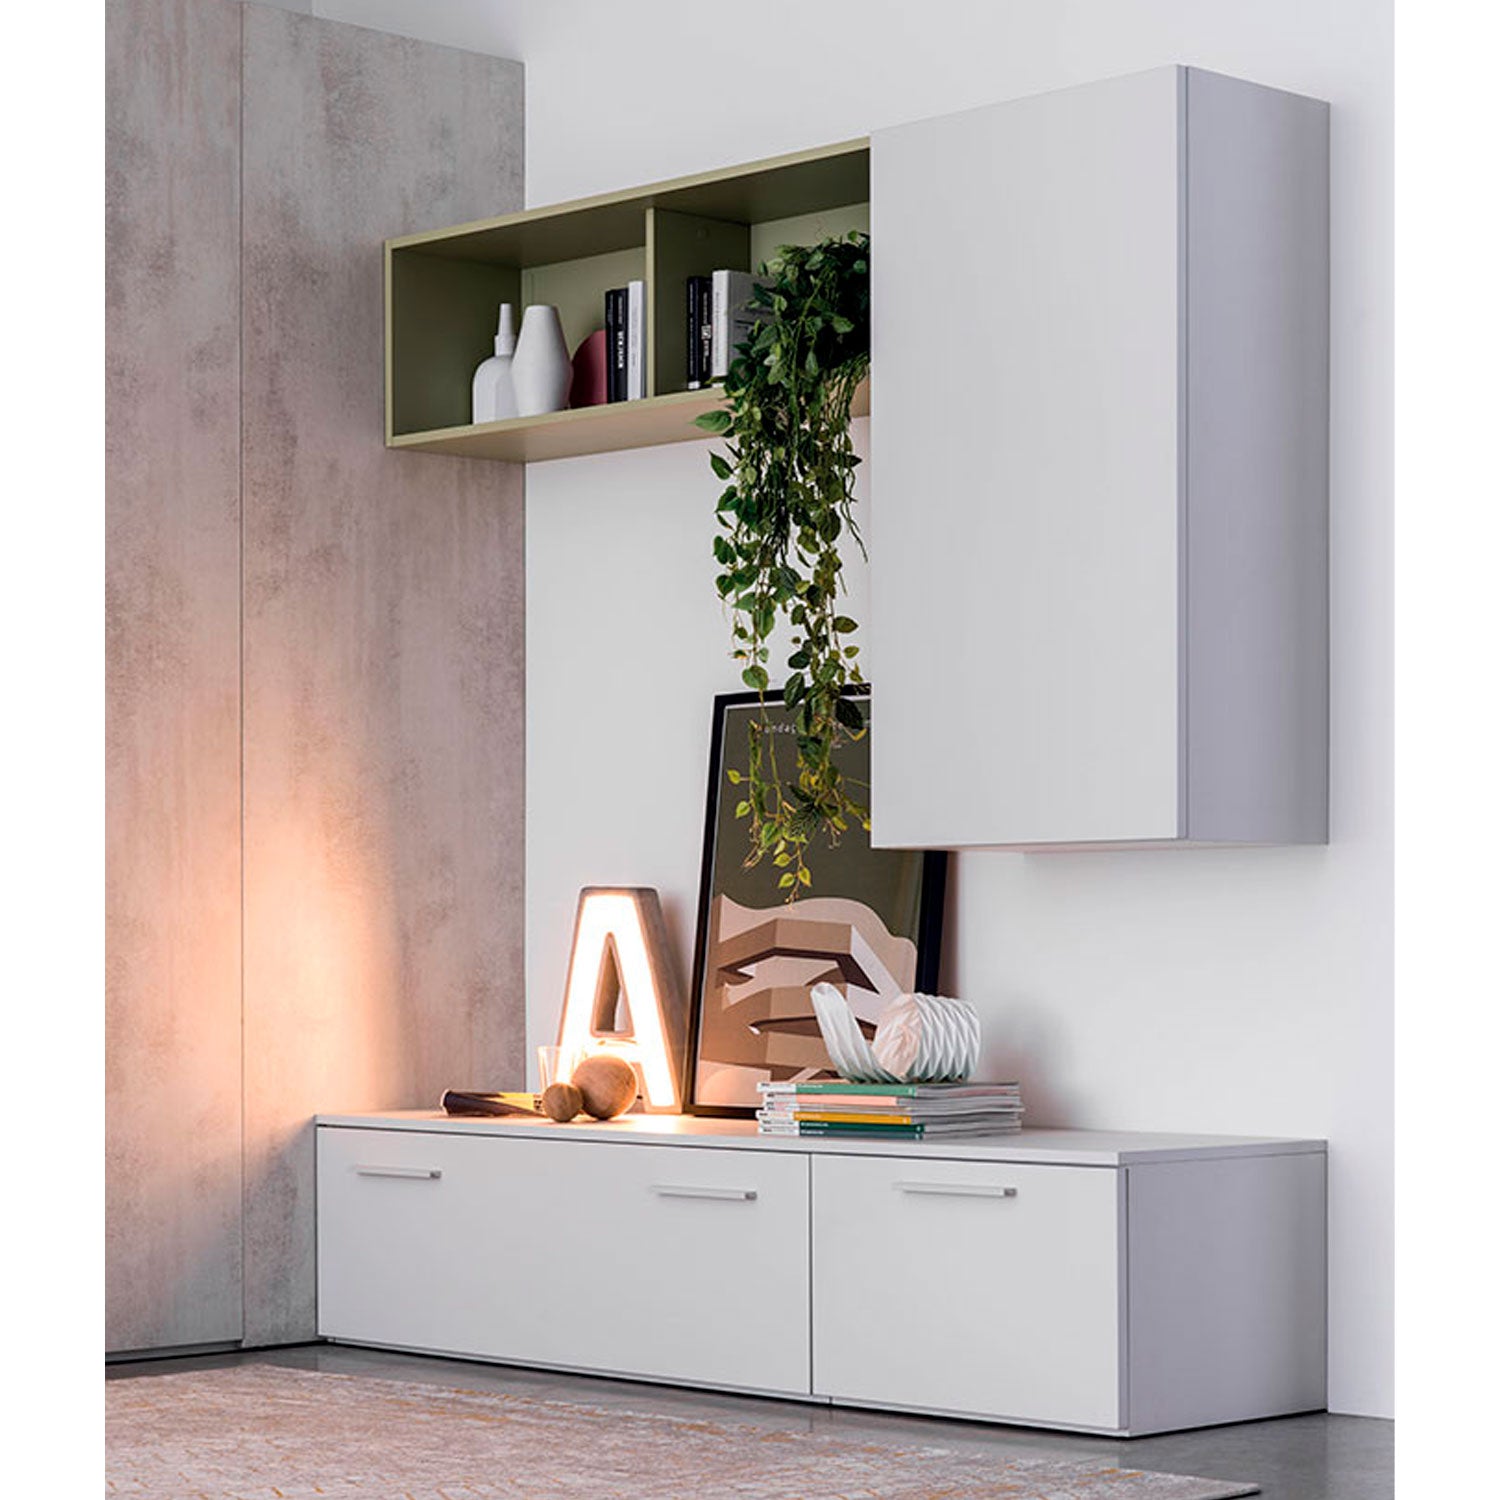 IM20-03 Studio Bedroom Set with Foldaway Bed by Clever